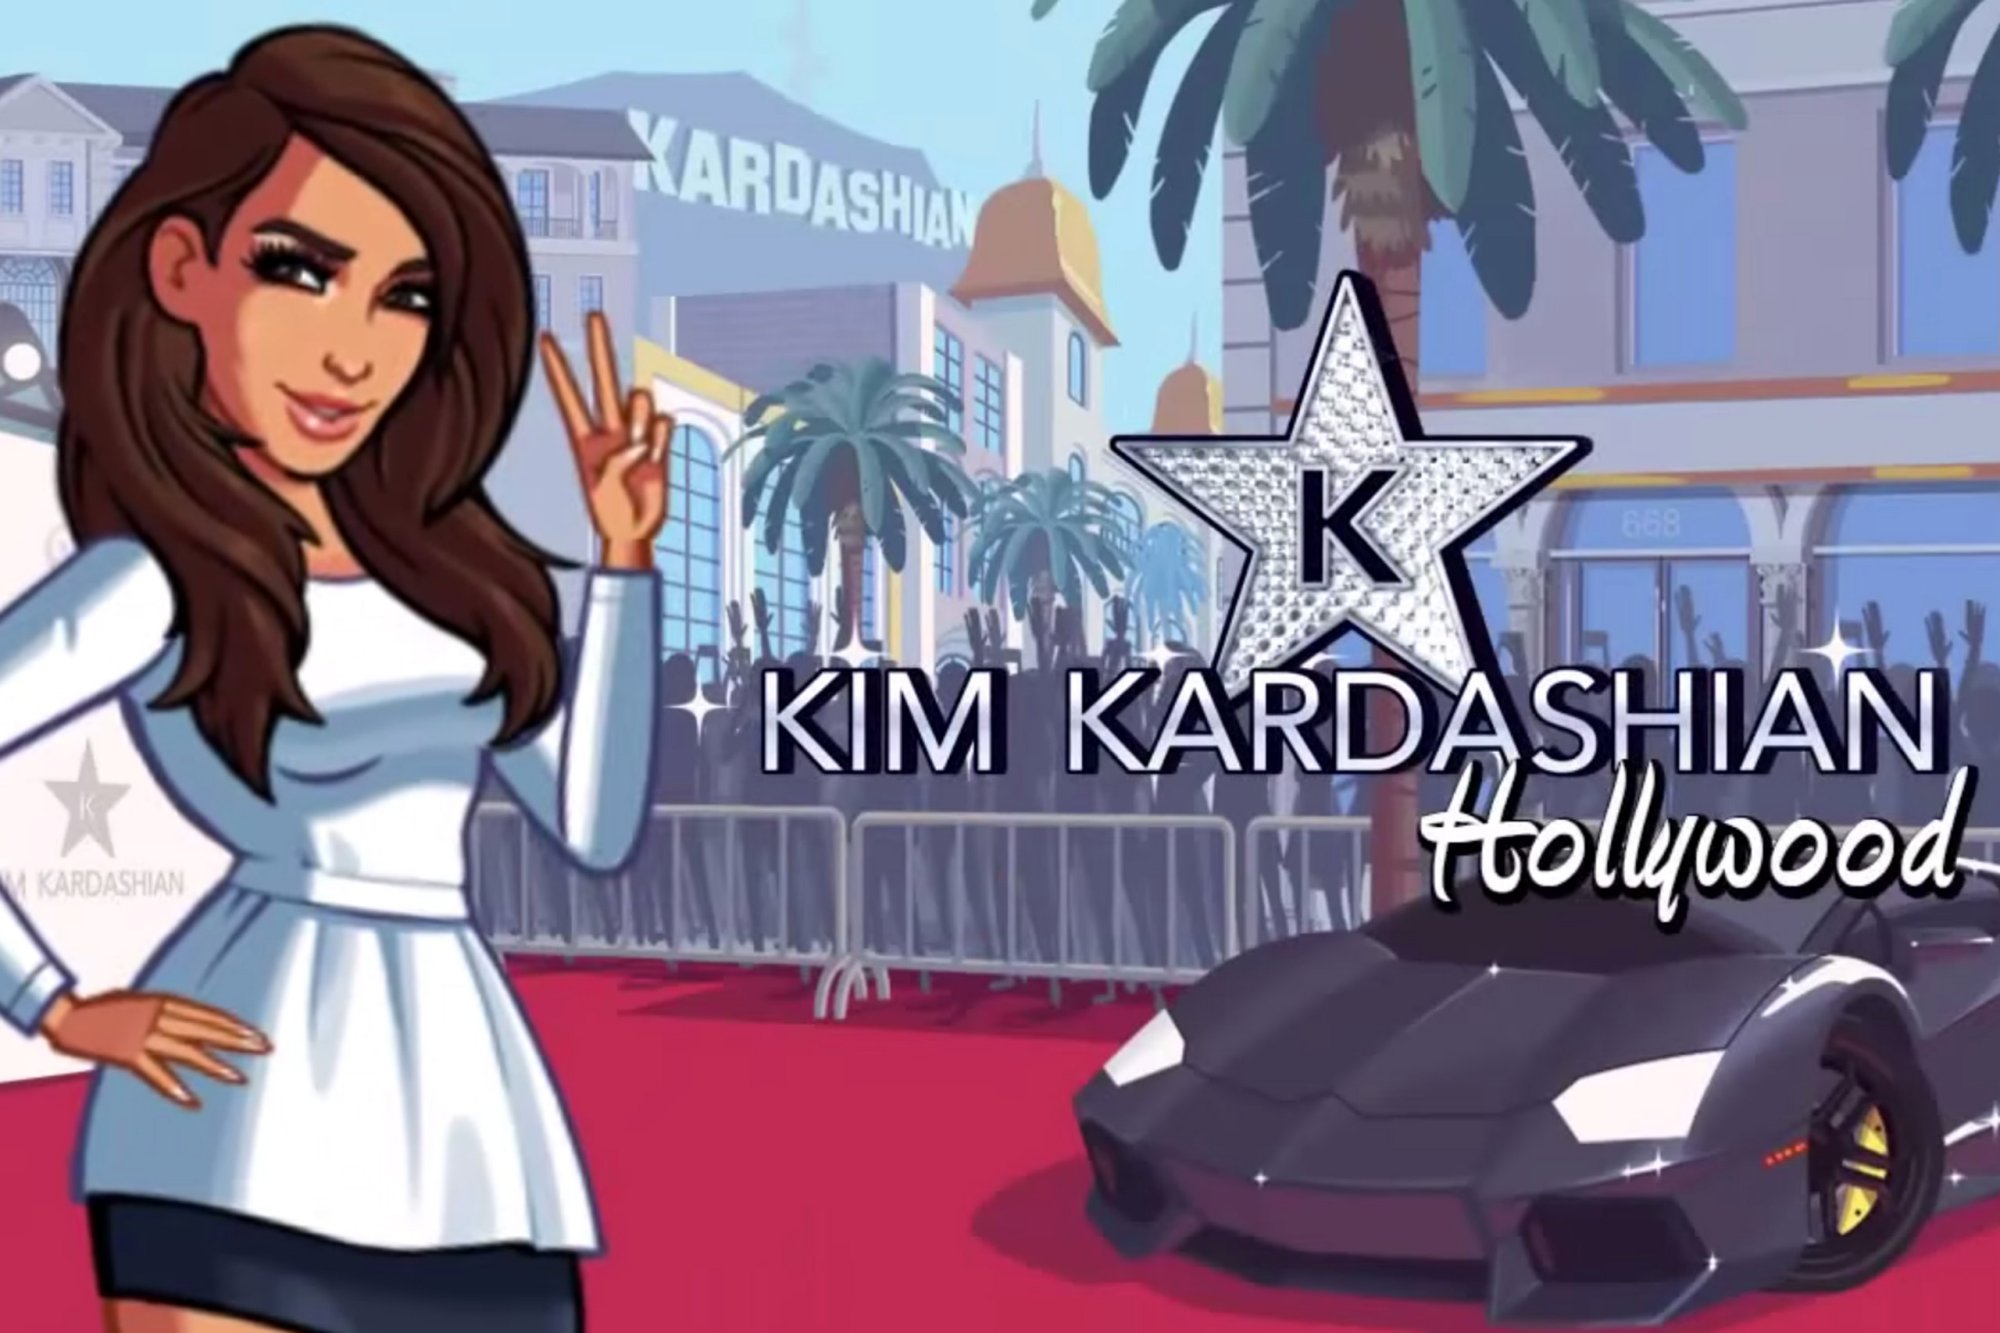 A femme looking person making a peace sign on a red carpet near a luxury car. A crowd of people stand behind a barrier. Text reads 'Kim Kardashian Hollywood'. There is a sparkling star with the letter K on it.